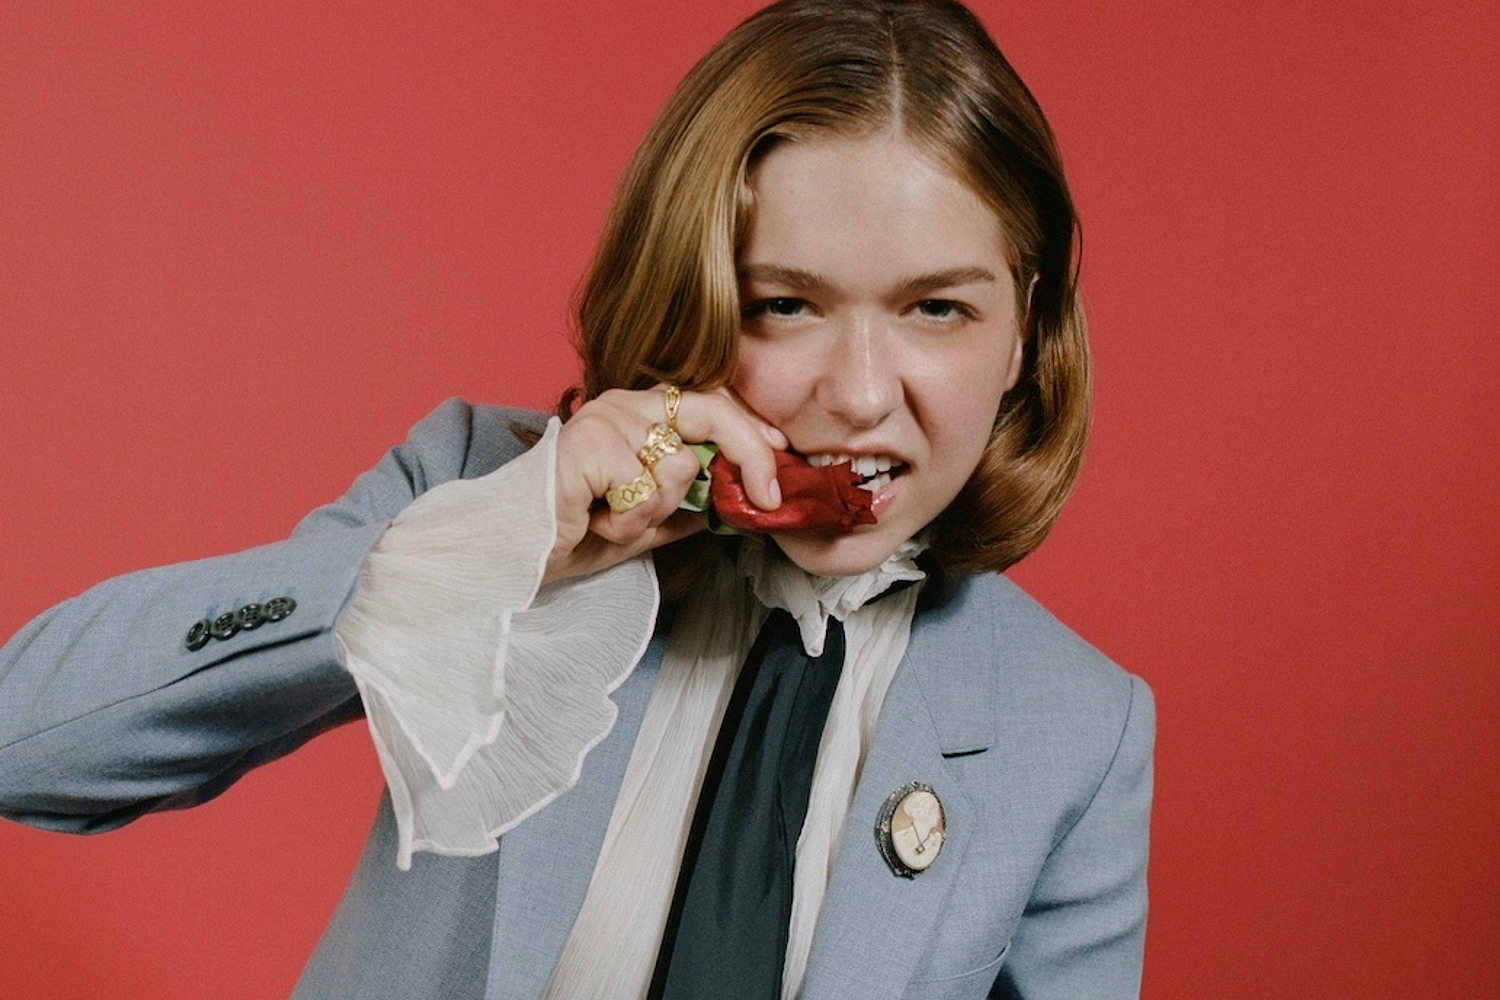 Snail Mail releases new track 'Ben Franklin'